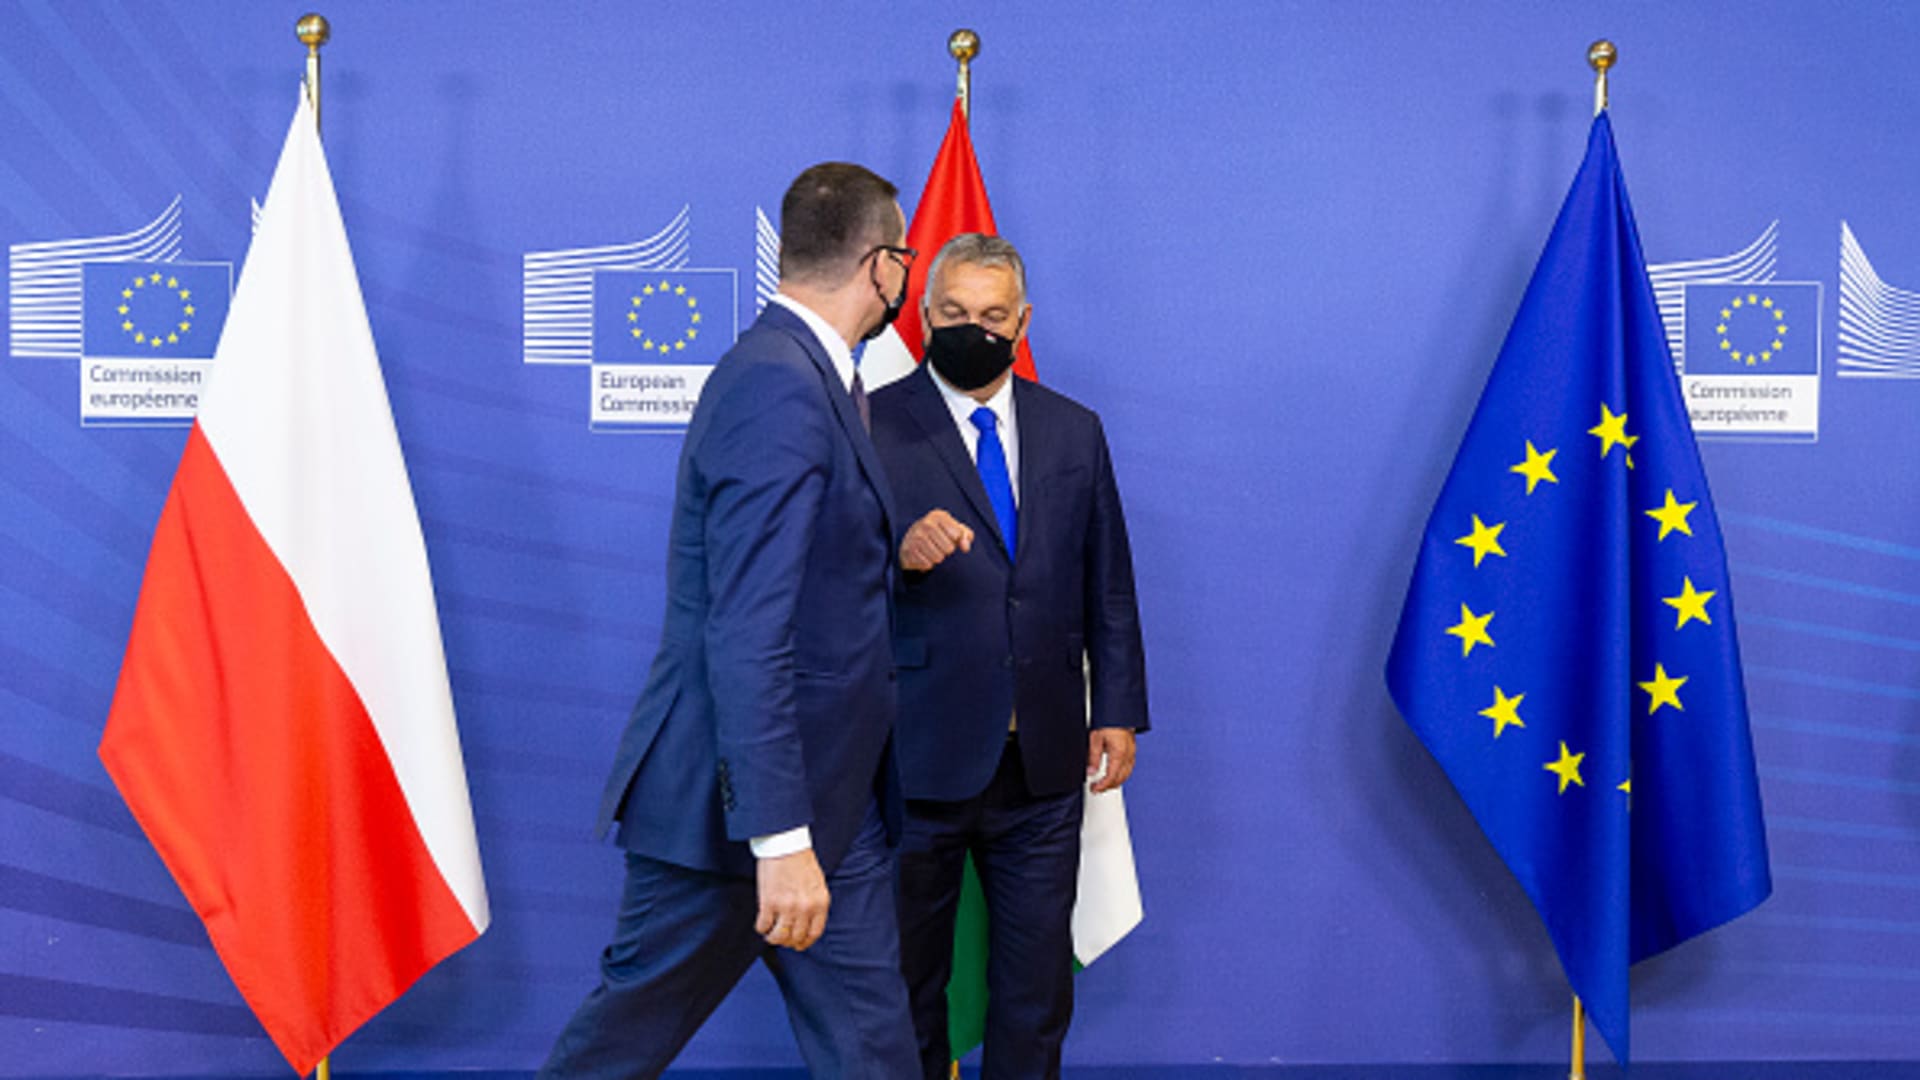 Polish Prime Minister Mateusz Morawiecki (L) and the Hungarian Prime Minister Viktor Mihaly Orban (R) attend a Visegrad Group meeting in the Berlaymont, the EU Commission headquarter on September 24, 2020, in Brussels, Belgium.